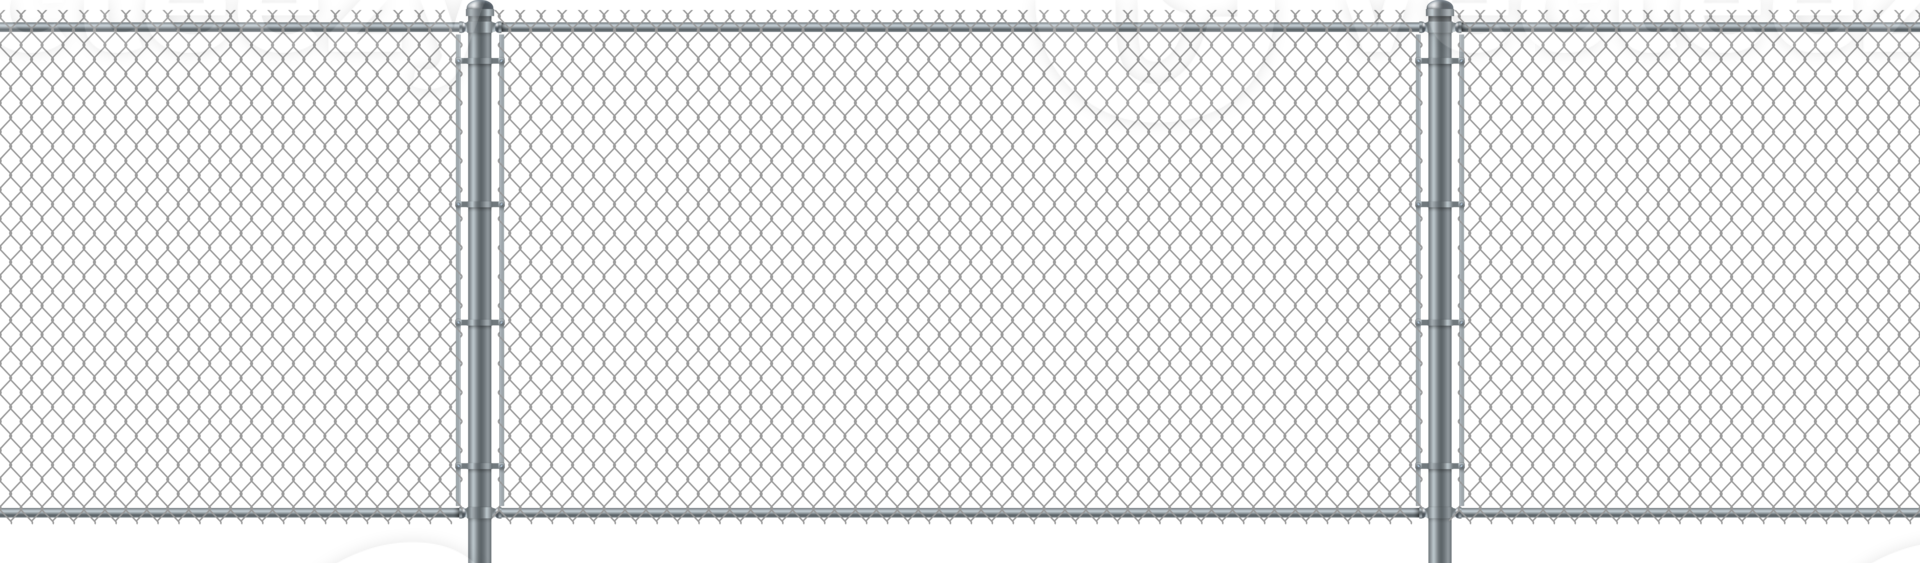 wire fence element png